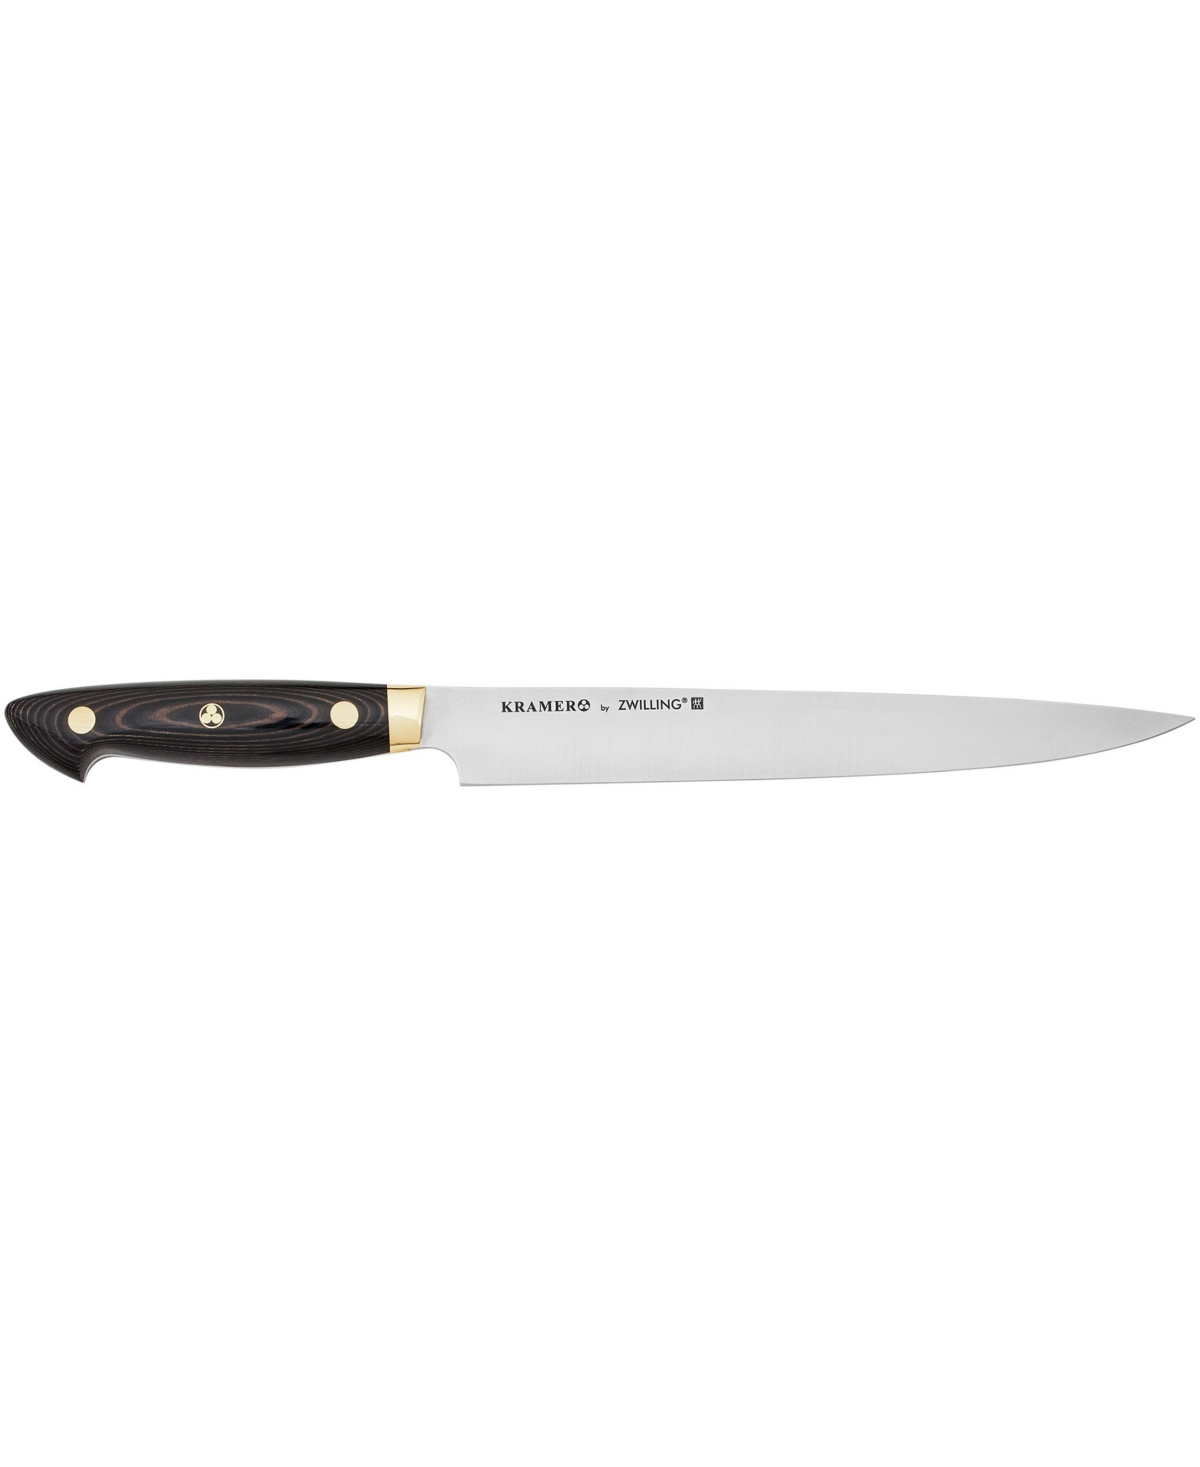 Zwilling Bob Kramer Carbon 2.0 Slicing Knife, 9" In Brown And Silver-tone